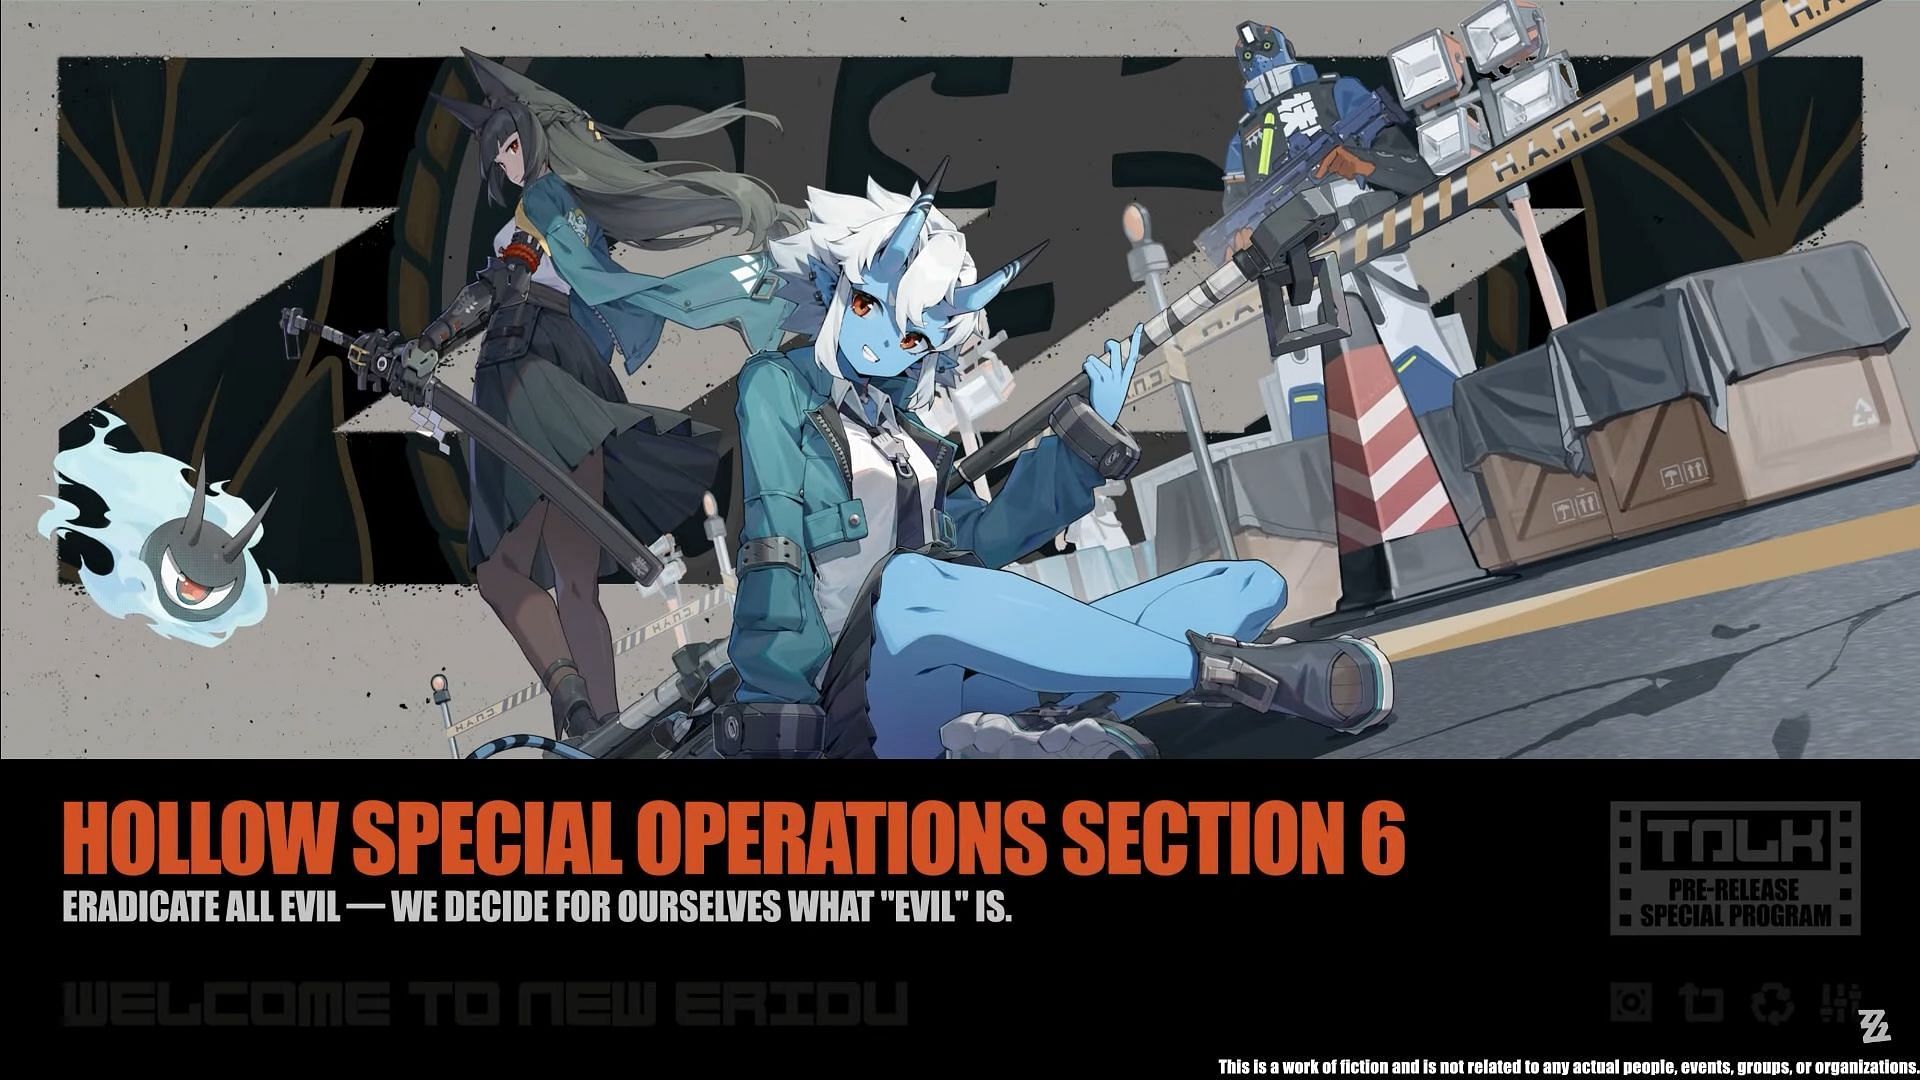 Hollow Special Operations Section 6 (Image via HoYoverse)